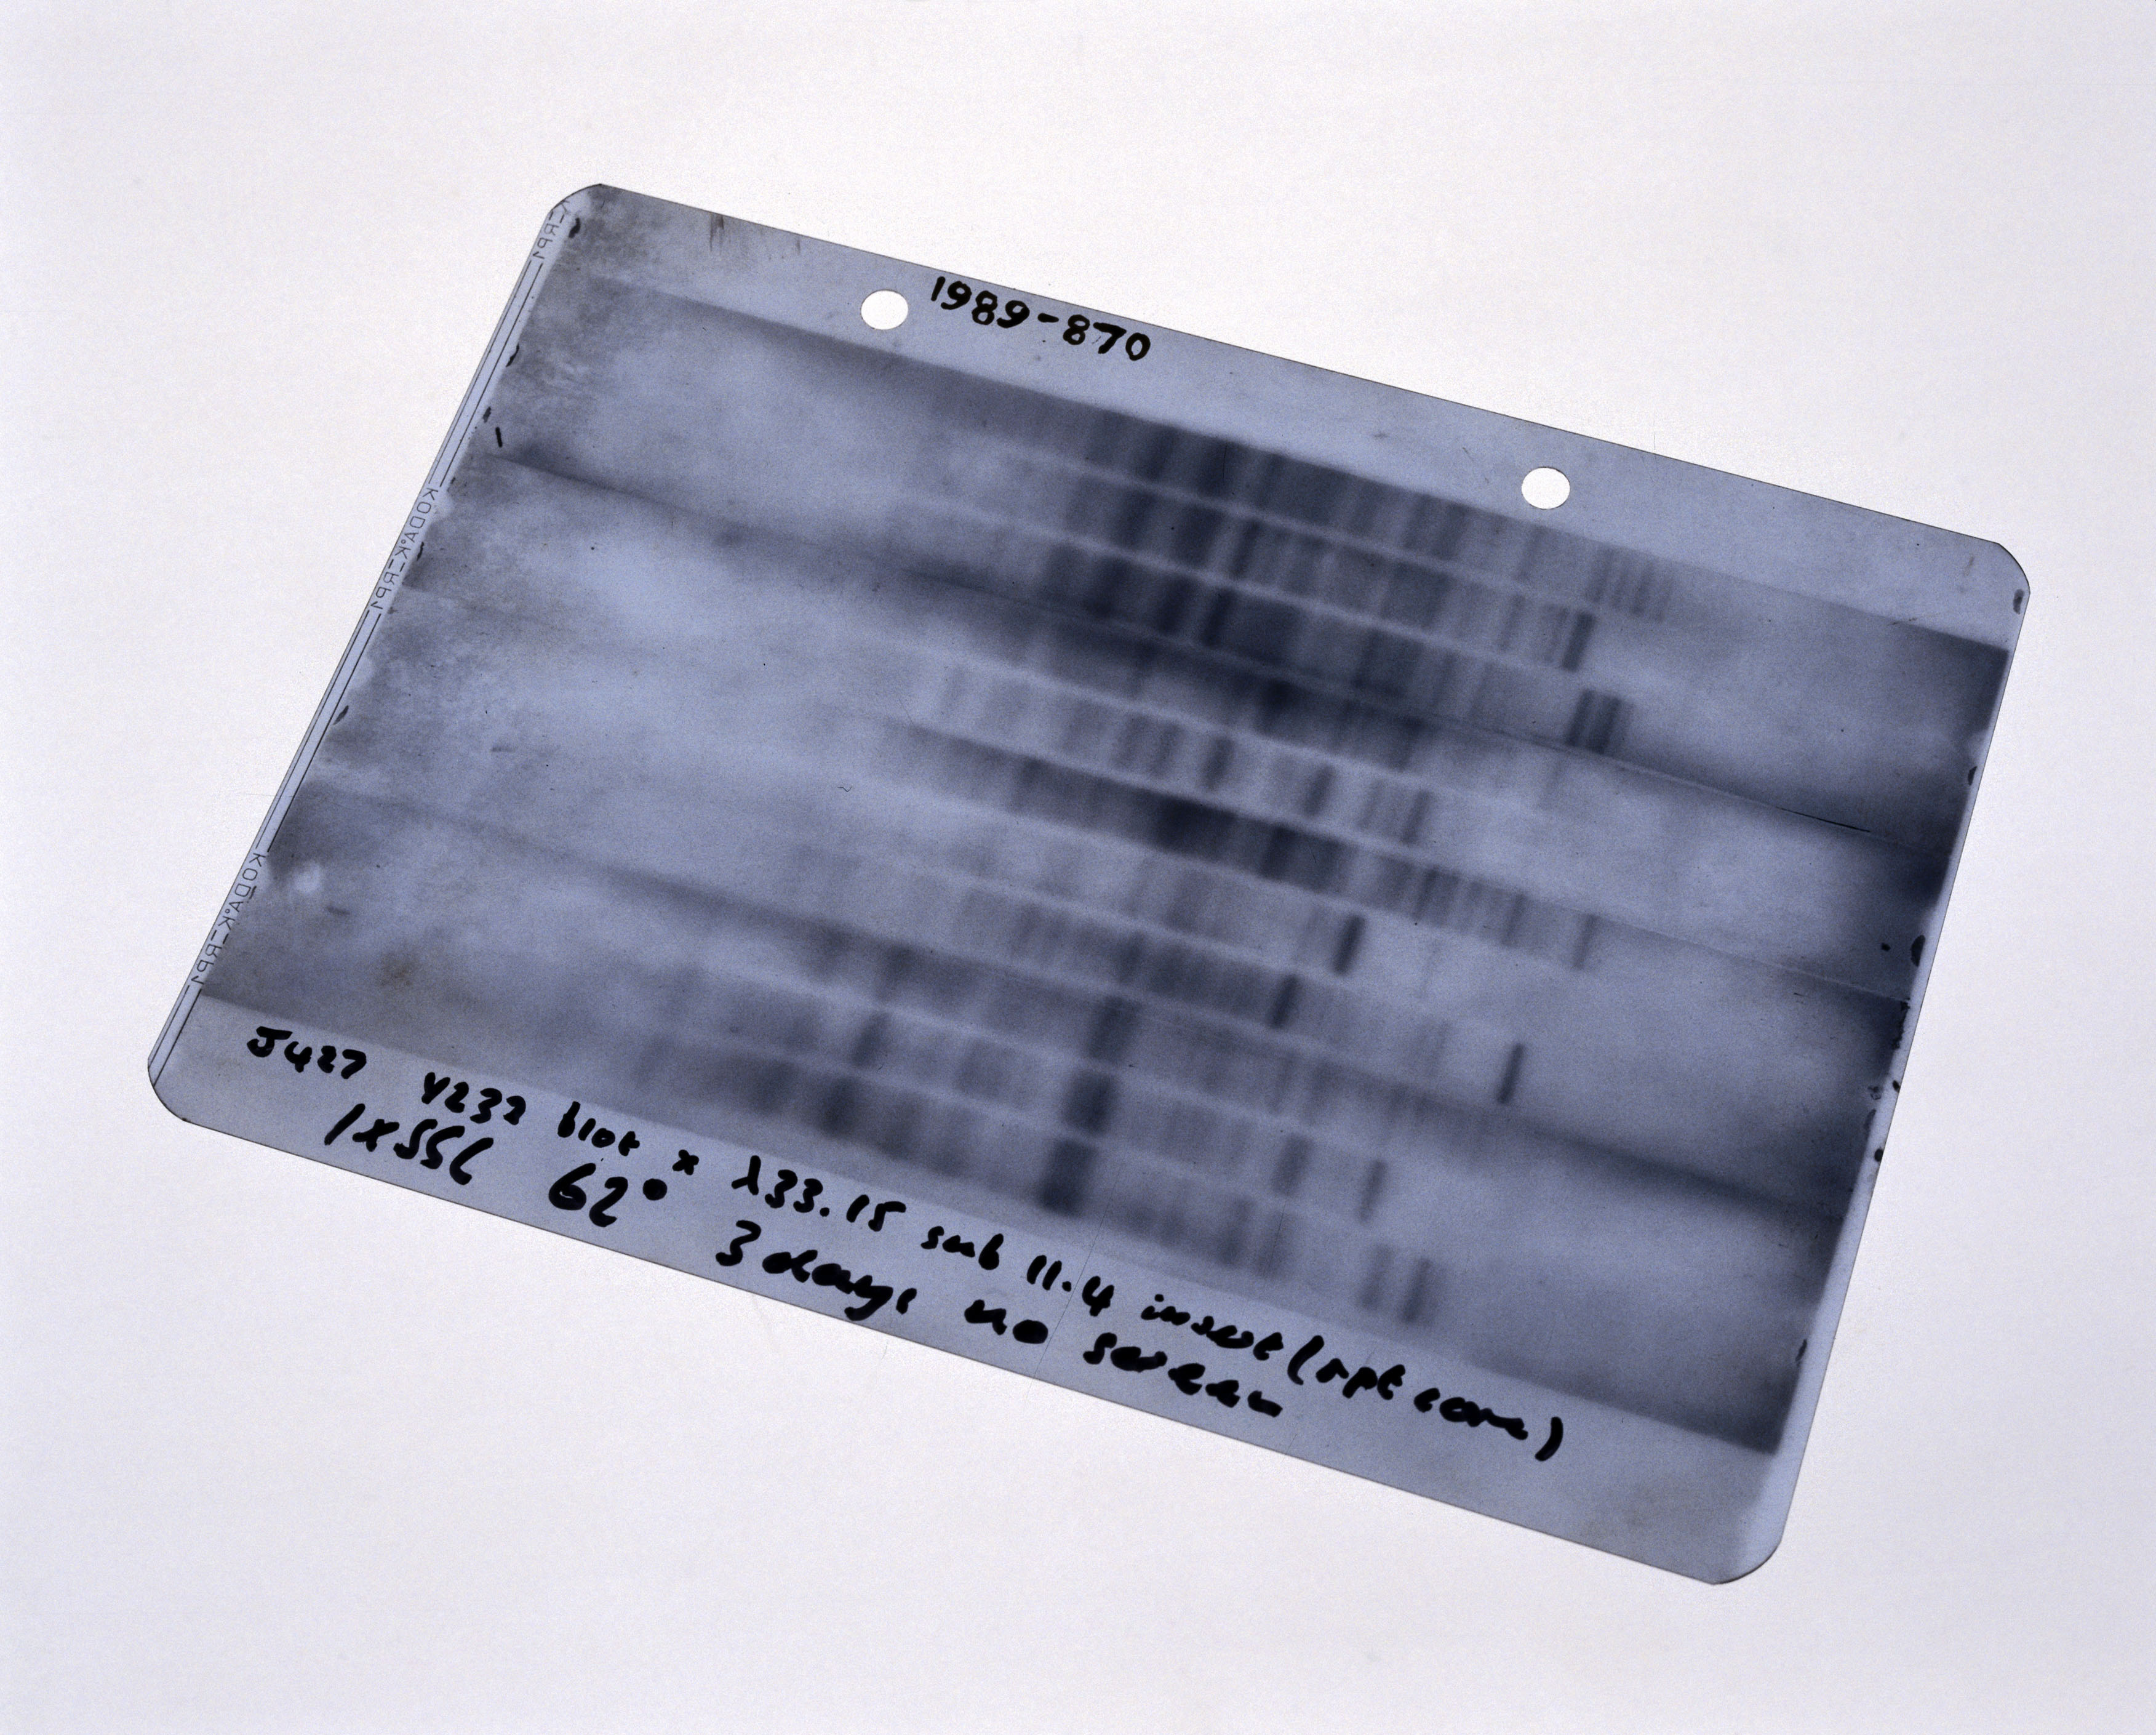 An autoradiograph of the first genetic fingerprint, 1984 © Science Museum / SSPL